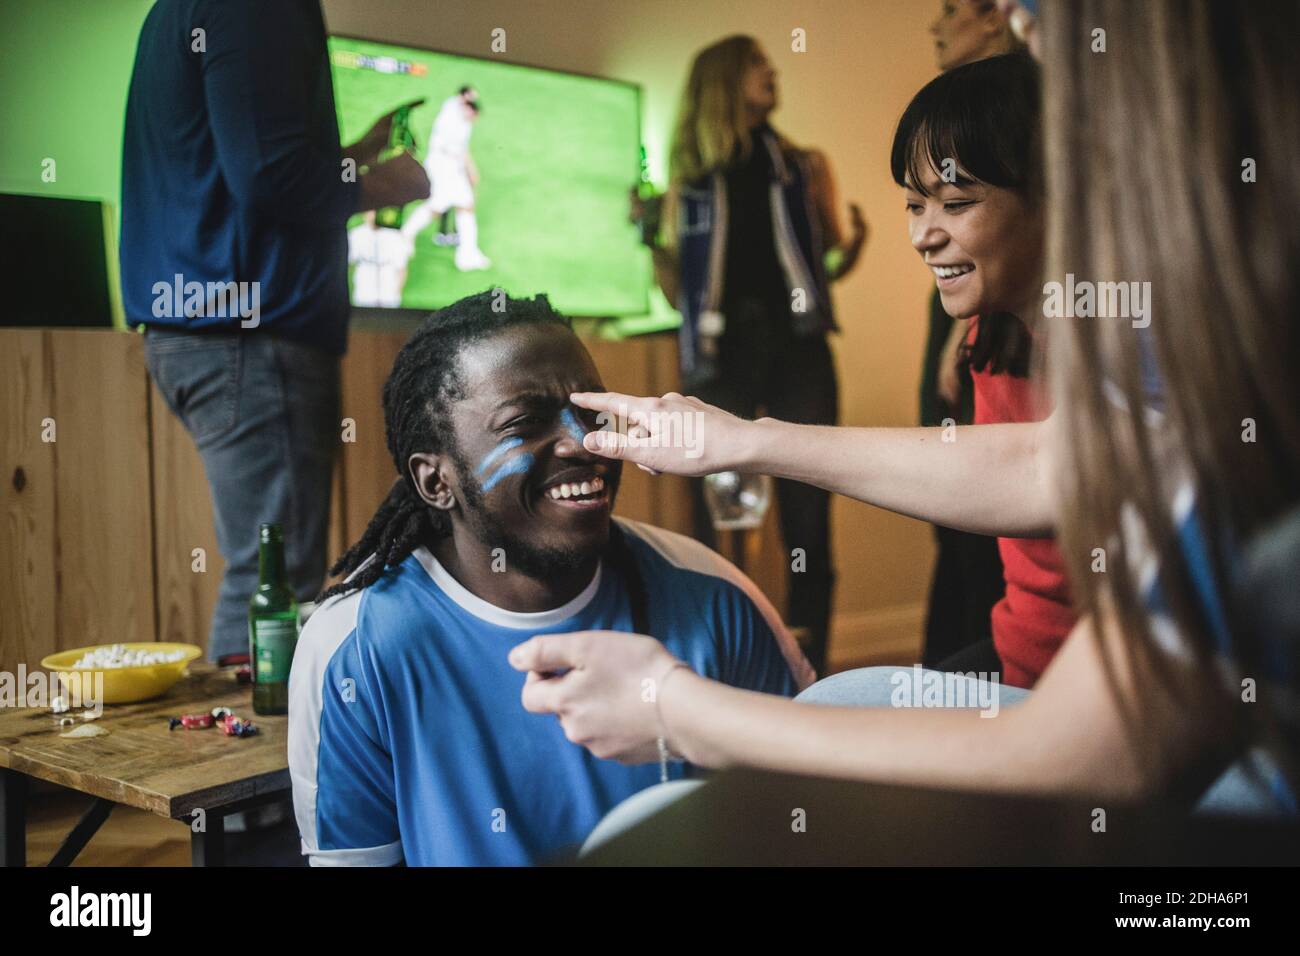 Young woman applying face paint on friend's cheek during soccer match Stock Photo